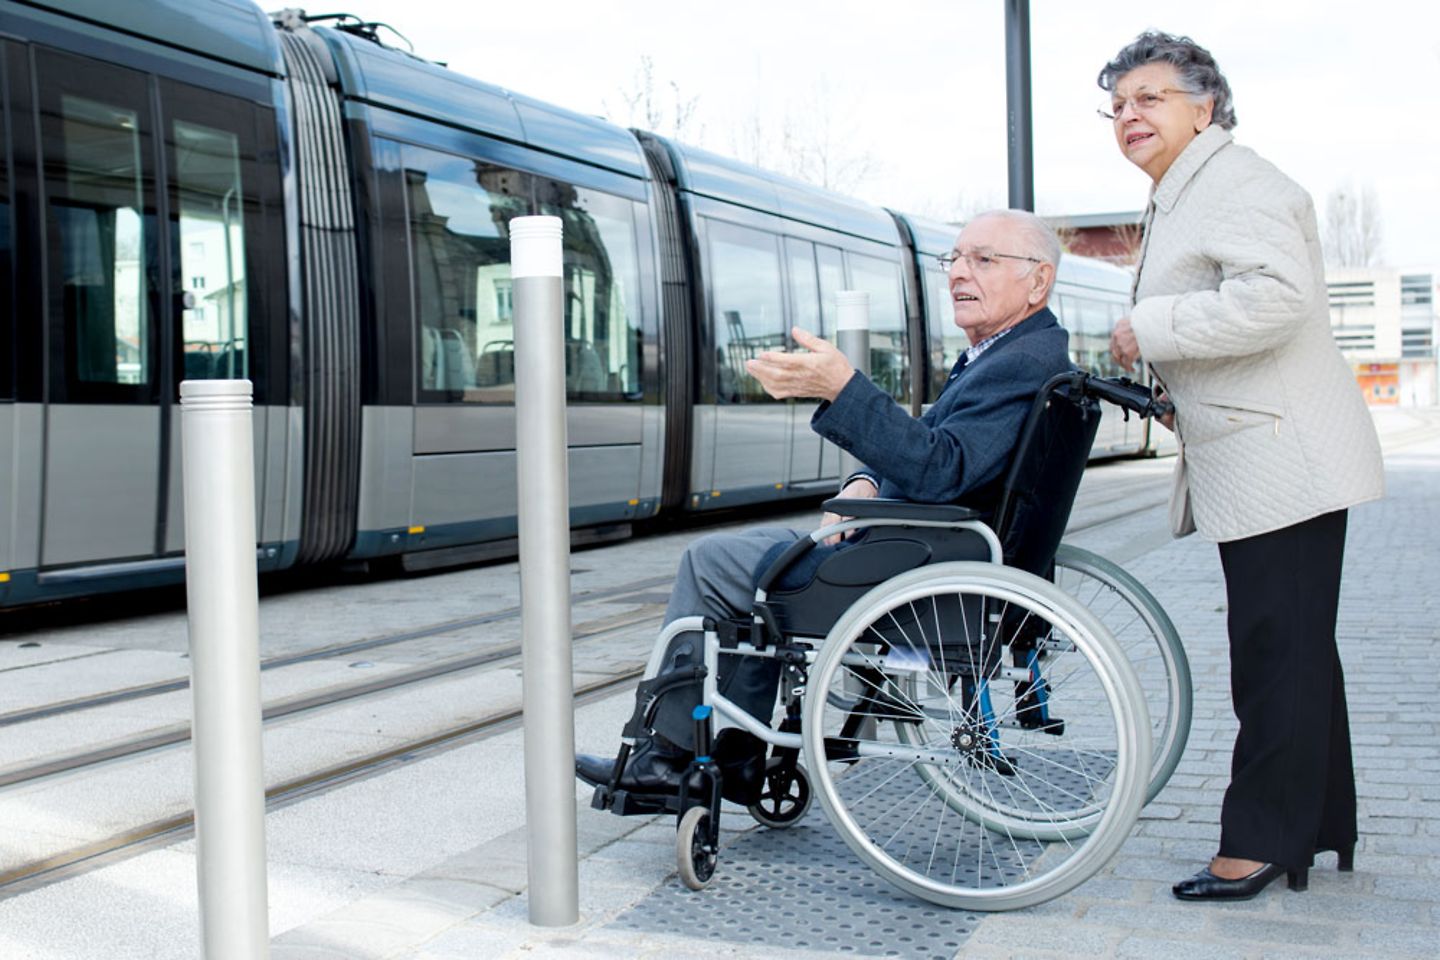 Elderly couple waiting for train in wheelchair, public transport infrastructure